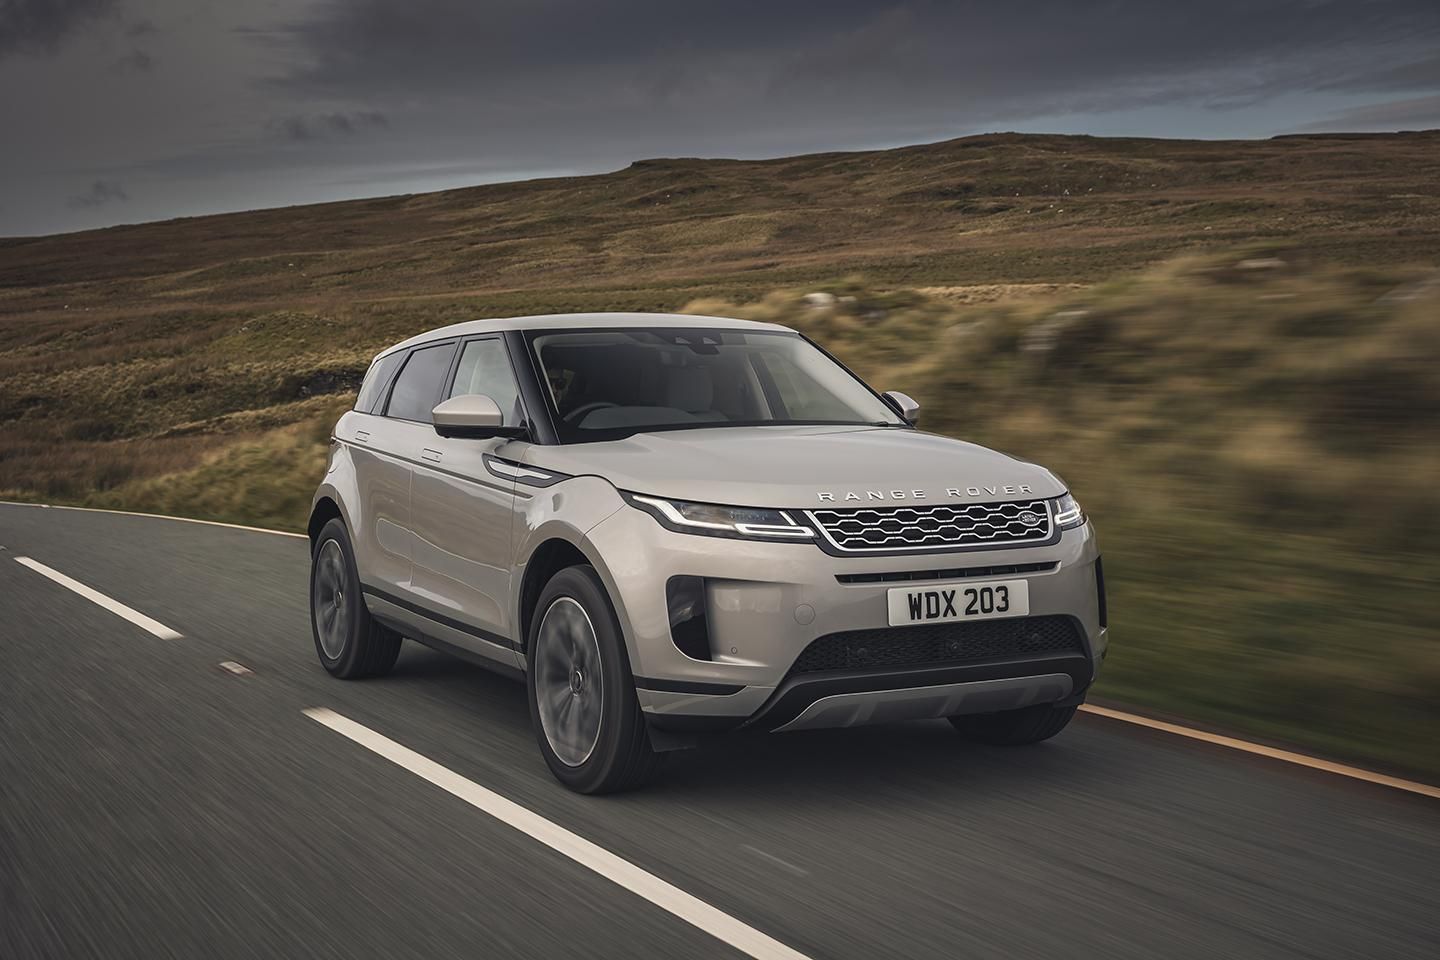 2022 Land Rover Range Rover Evoque - News, reviews, picture